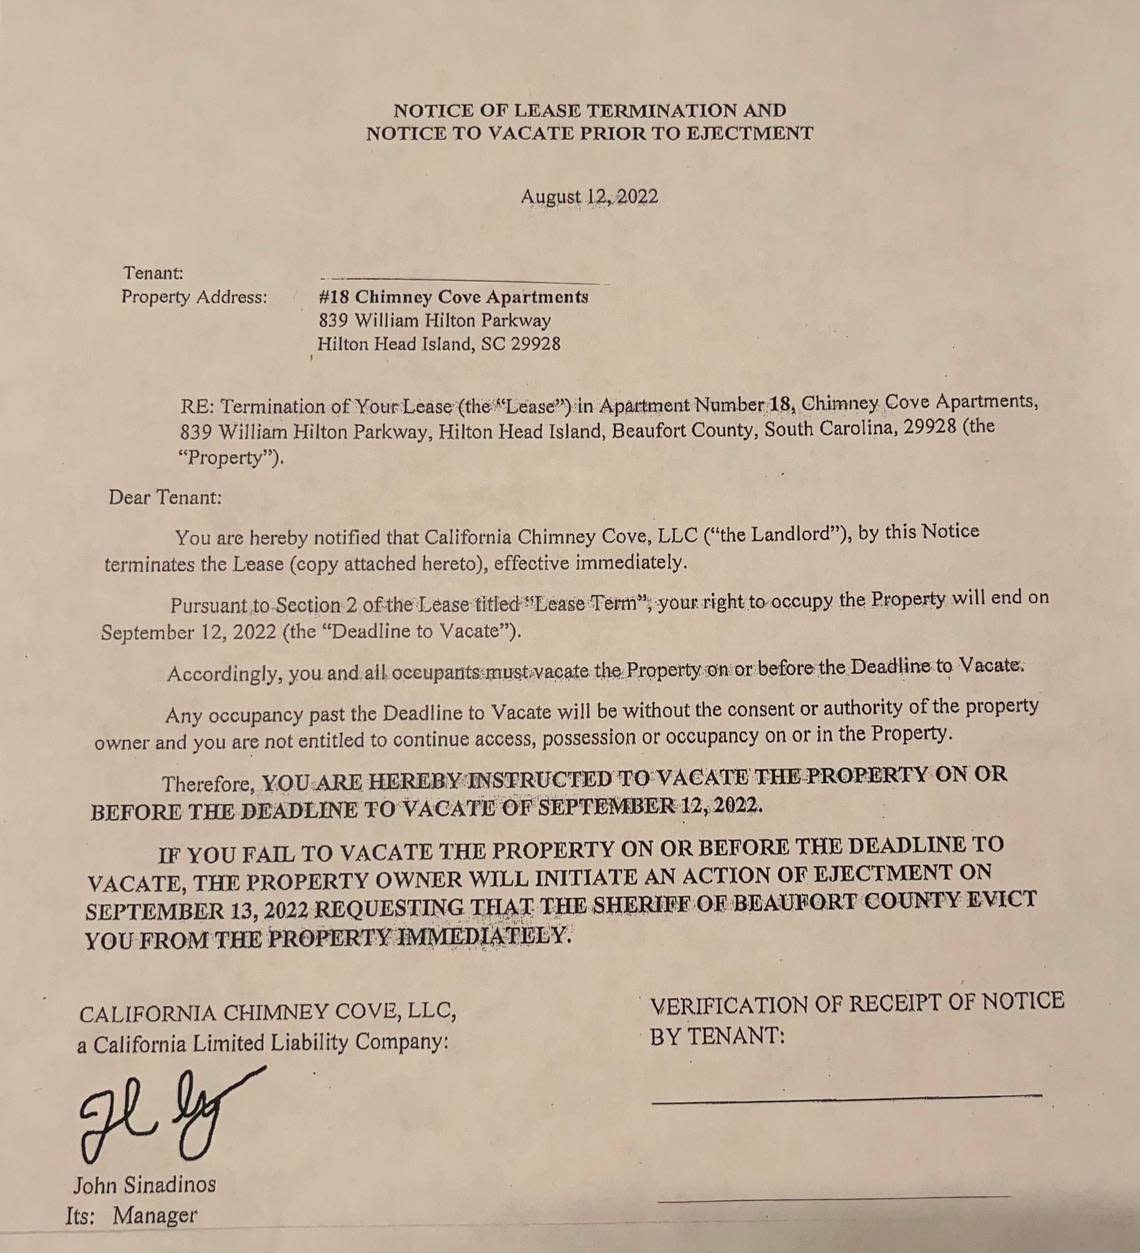 Chimney Cove residents came home on Aug. 12 to eviction notices like this one taped to their door telling them that they have 30 days to vacate the property.